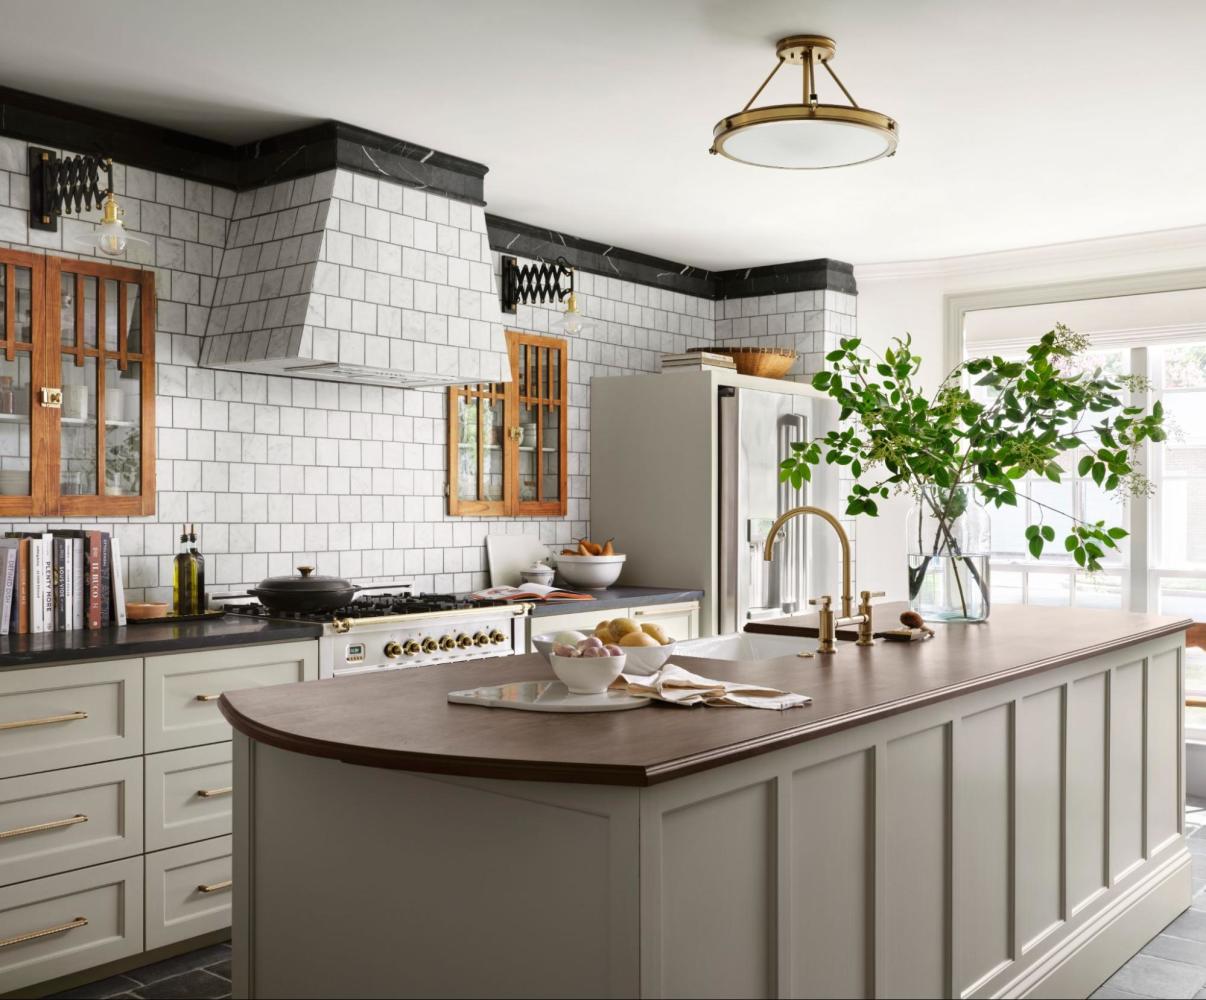 Add style and function to your kitchen